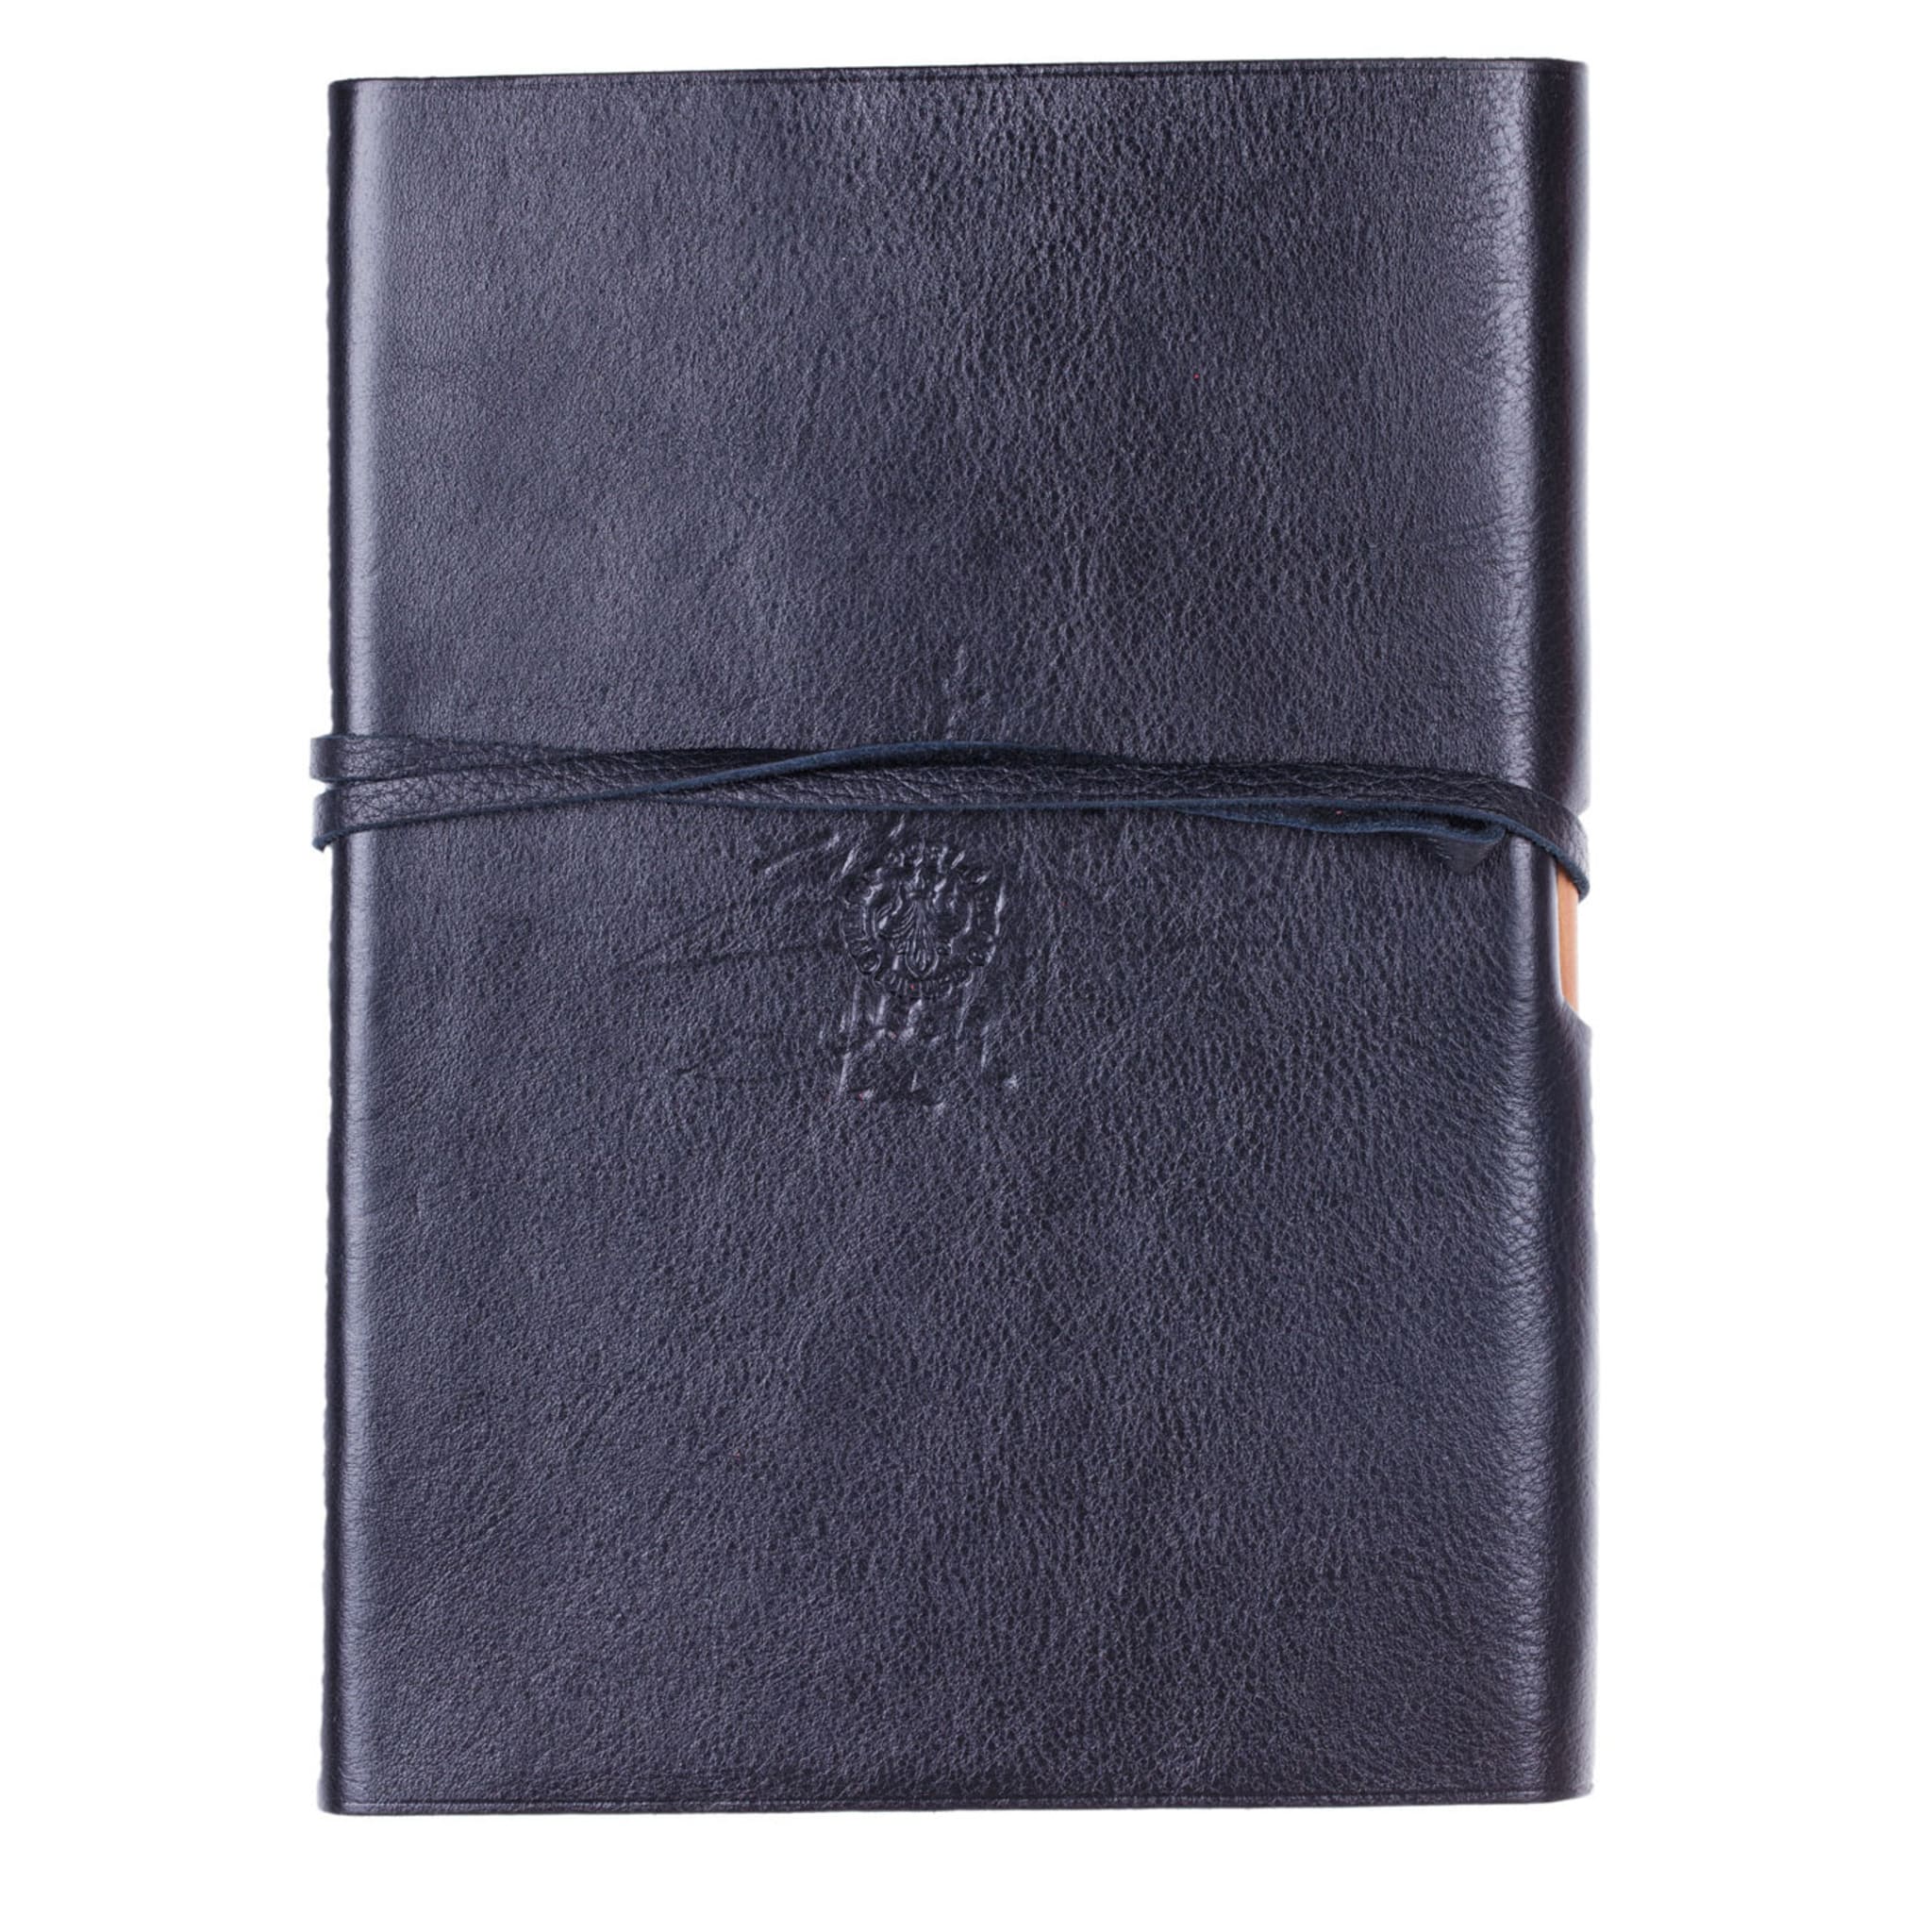 Lace Black Leather Notebook - Alternative view 3